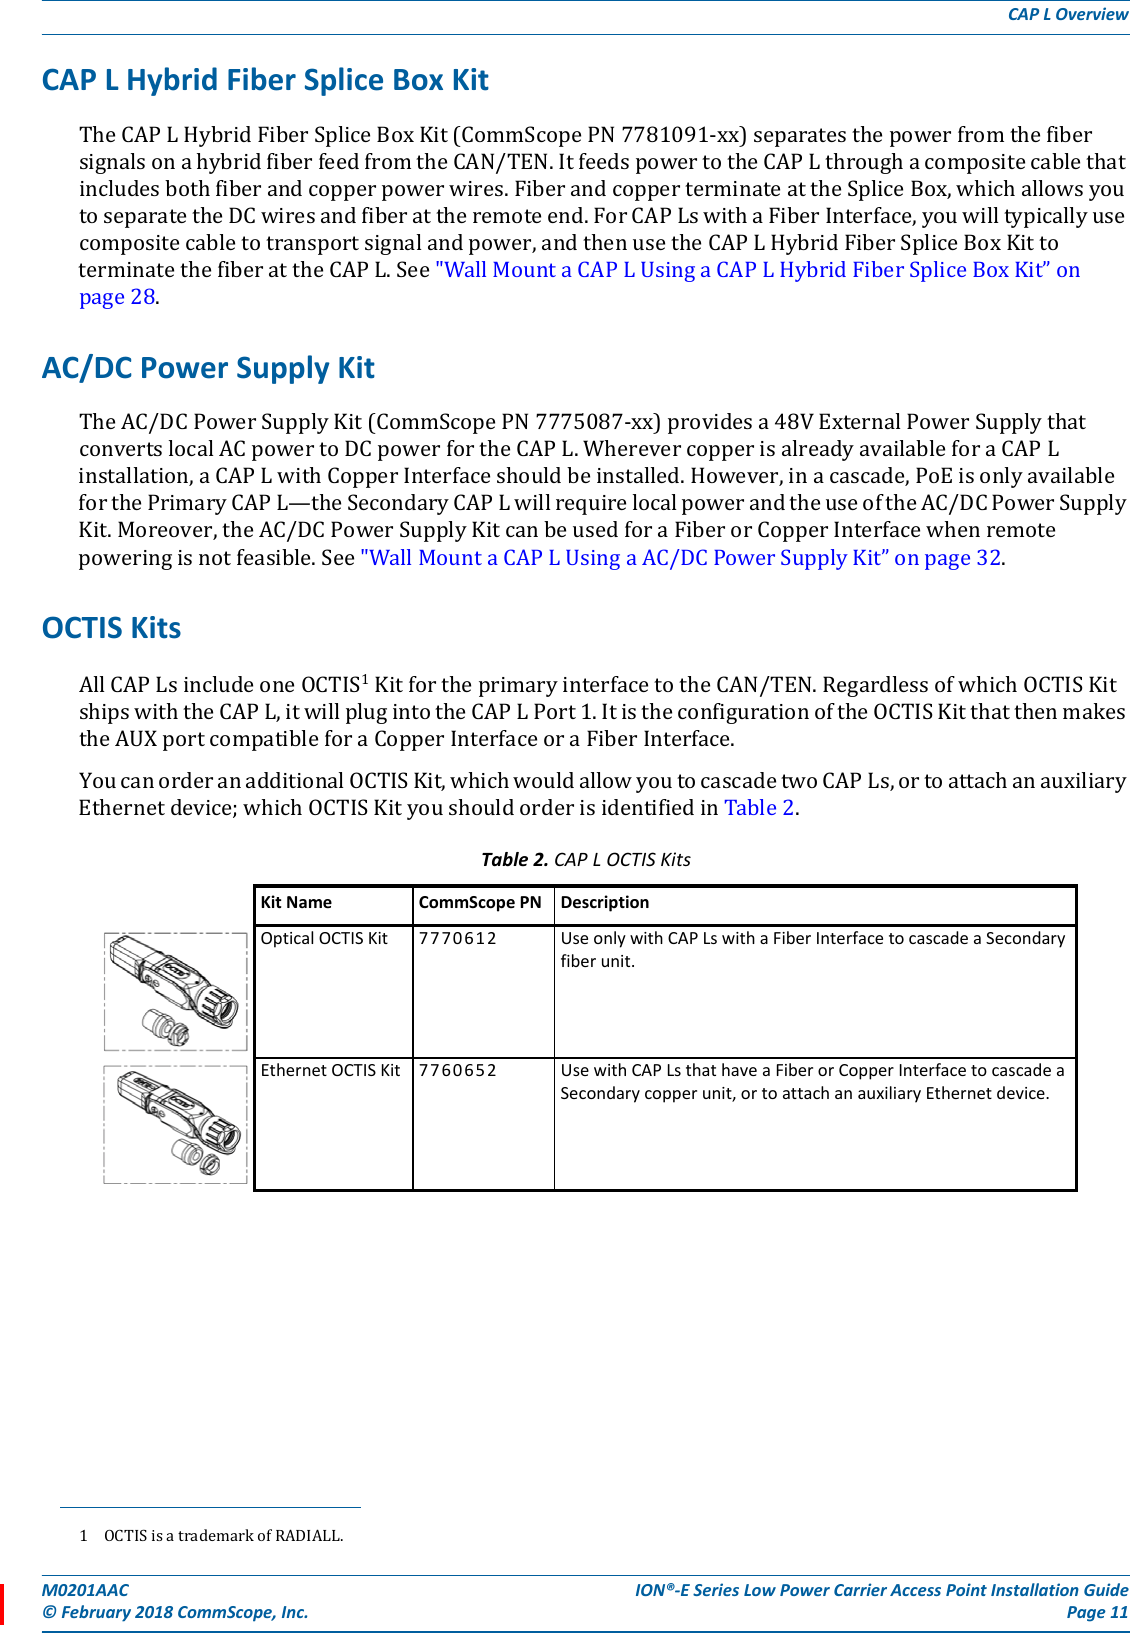 M0201AAC ION®-E Series Low Power Carrier Access Point Installation Guide© February 2018 CommScope, Inc. Page 11CAP L OverviewCAP L Hybrid Fiber Splice Box KitTheCAPLHybridFiberSpliceBoxKit(CommScopePN7781091-xx)separatesthepowerfromthefibersignalsonahybridfiberfeedfromtheCAN/TEN.ItfeedspowertotheCAPLthroughacompositecablethatincludesbothfiberandcopperpowerwires.FiberandcopperterminateattheSpliceBox,whichallowsyoutoseparatetheDCwiresandfiberattheremoteend.ForCAPLswithaFiberInterface,youwilltypicallyusecompositecabletotransportsignalandpower,andthenusetheCAPLHybridFiberSpliceBoxKittoterminatethefiberattheCAPL.See&quot;WallMountaCAPLUsingaCAPLHybridFiberSpliceBoxKit”onpage28.AC/DC Power Supply KitTheAC/DCPowerSupplyKit(CommScopePN7775087-xx)providesa48VExternalPowerSupplythatconvertslocalACpowertoDCpowerfortheCAPL.WherevercopperisalreadyavailableforaCAPLinstallation,aCAPLwithCopperInterfaceshouldbeinstalled.However,inacascade,PoEisonlyavailableforthePrimaryCAPL—theSecondaryCAPLwillrequirelocalpowerandtheuseoftheAC/DCPowerSupplyKit.Moreover,theAC/DCPowerSupplyKitcanbeusedforaFiberorCopperInterfacewhenremotepoweringisnotfeasible.See&quot;WallMountaCAPLUsingaAC/DCPowerSupplyKit”onpage32.OCTIS KitsAllCAPLsincludeoneOCTIS1KitfortheprimaryinterfacetotheCAN/TEN.RegardlessofwhichOCTISKitshipswiththeCAPL,itwillplugintotheCAPLPort1.ItistheconfigurationoftheOCTISKitthatthenmakestheAUXportcompatibleforaCopperInterfaceoraFiberInterface.YoucanorderanadditionalOCTISKit,whichwouldallowyoutocascadetwoCAPLs,ortoattachanauxiliaryEthernetdevice;whichOCTISKityoushouldorderisidentifiedinTable2.1 OCTISisatrademarkofRADIALL.Table 2. CAP LOCTIS KitsKit Name CommScope PN DescriptionOptical OCTIS Kit 7770612 Use only with CAP Ls with a Fiber Interface to cascade a Secondary fiber unit.Ethernet OCTIS Kit 7760652 Use with CAP Ls that have a Fiber or Copper Interface to cascade a Secondary copper unit, or to attach an auxiliary Ethernet device.